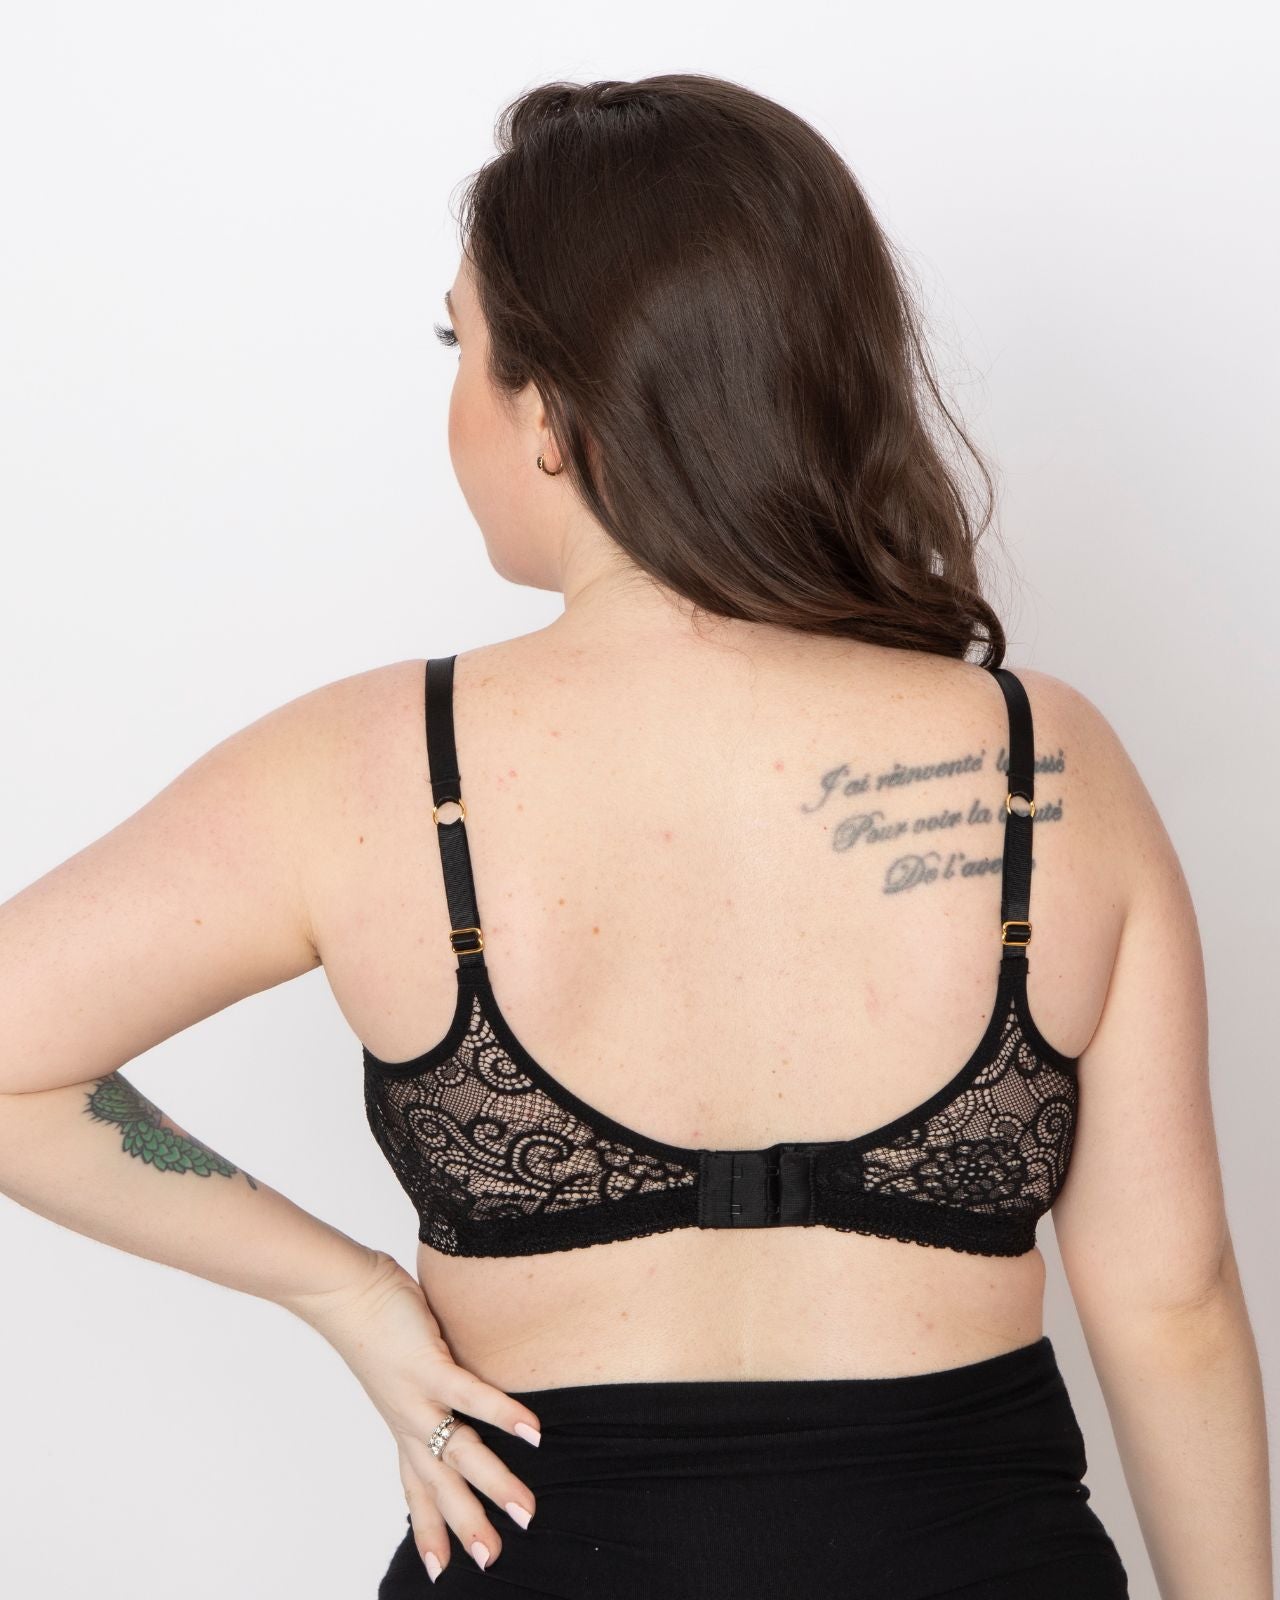 40A Mastectomy Bras - Pocketed bras & lingerie for Post Surgery